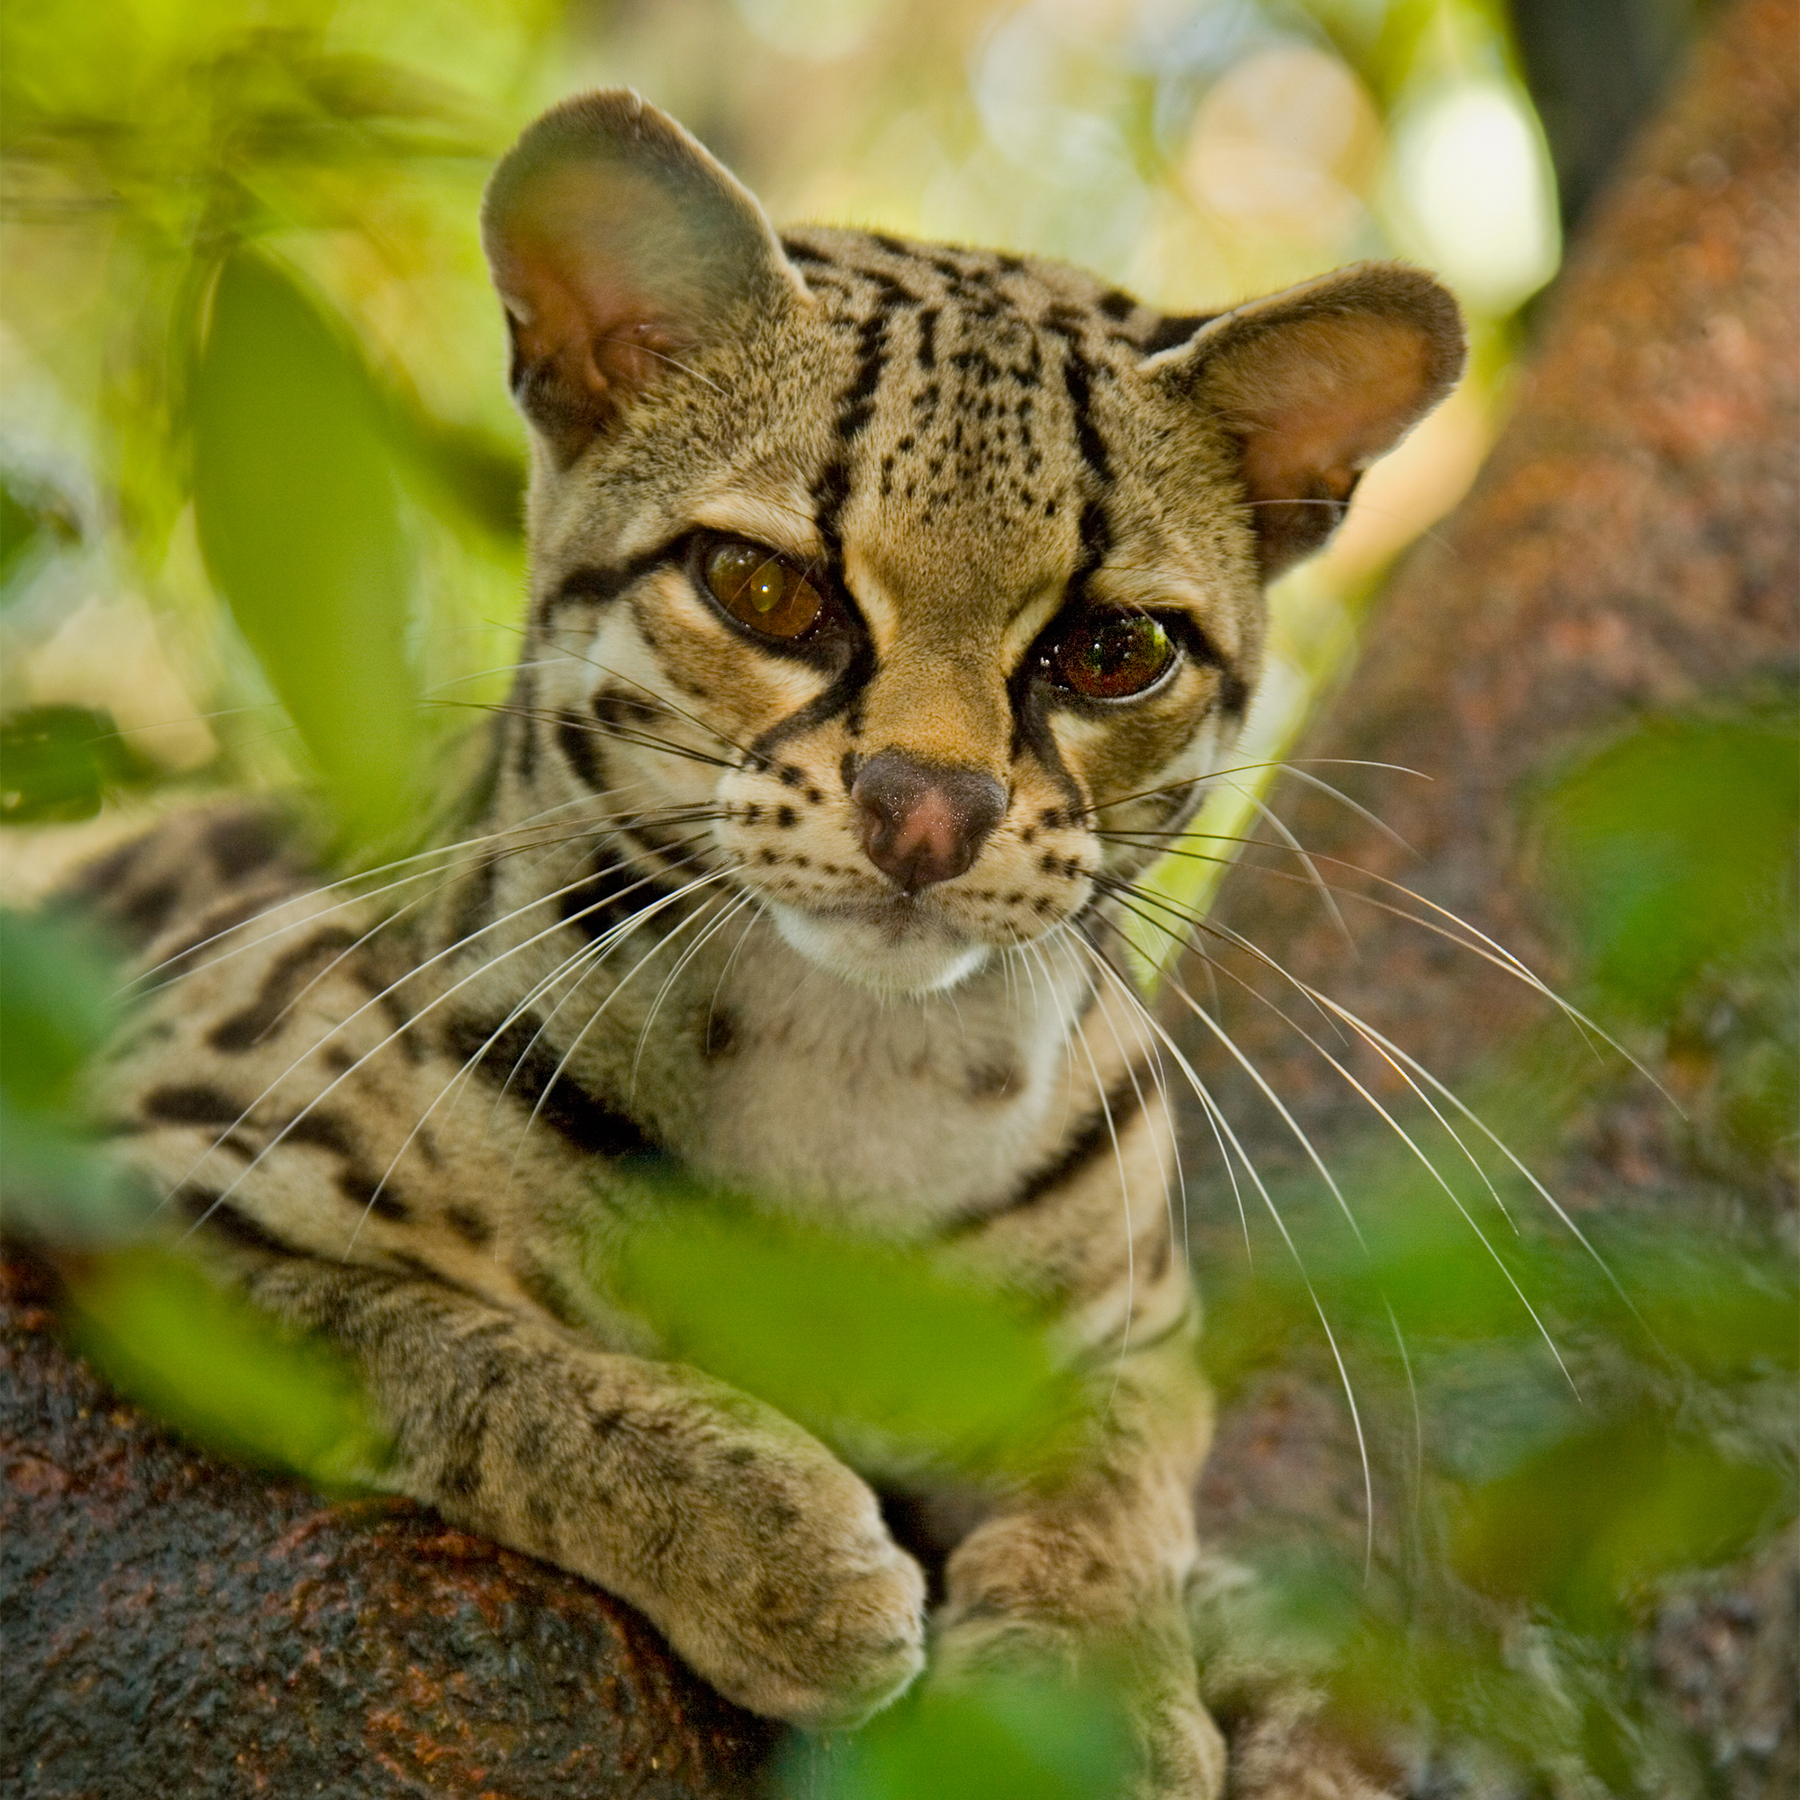 a close-up of a margay, a small type of leopard